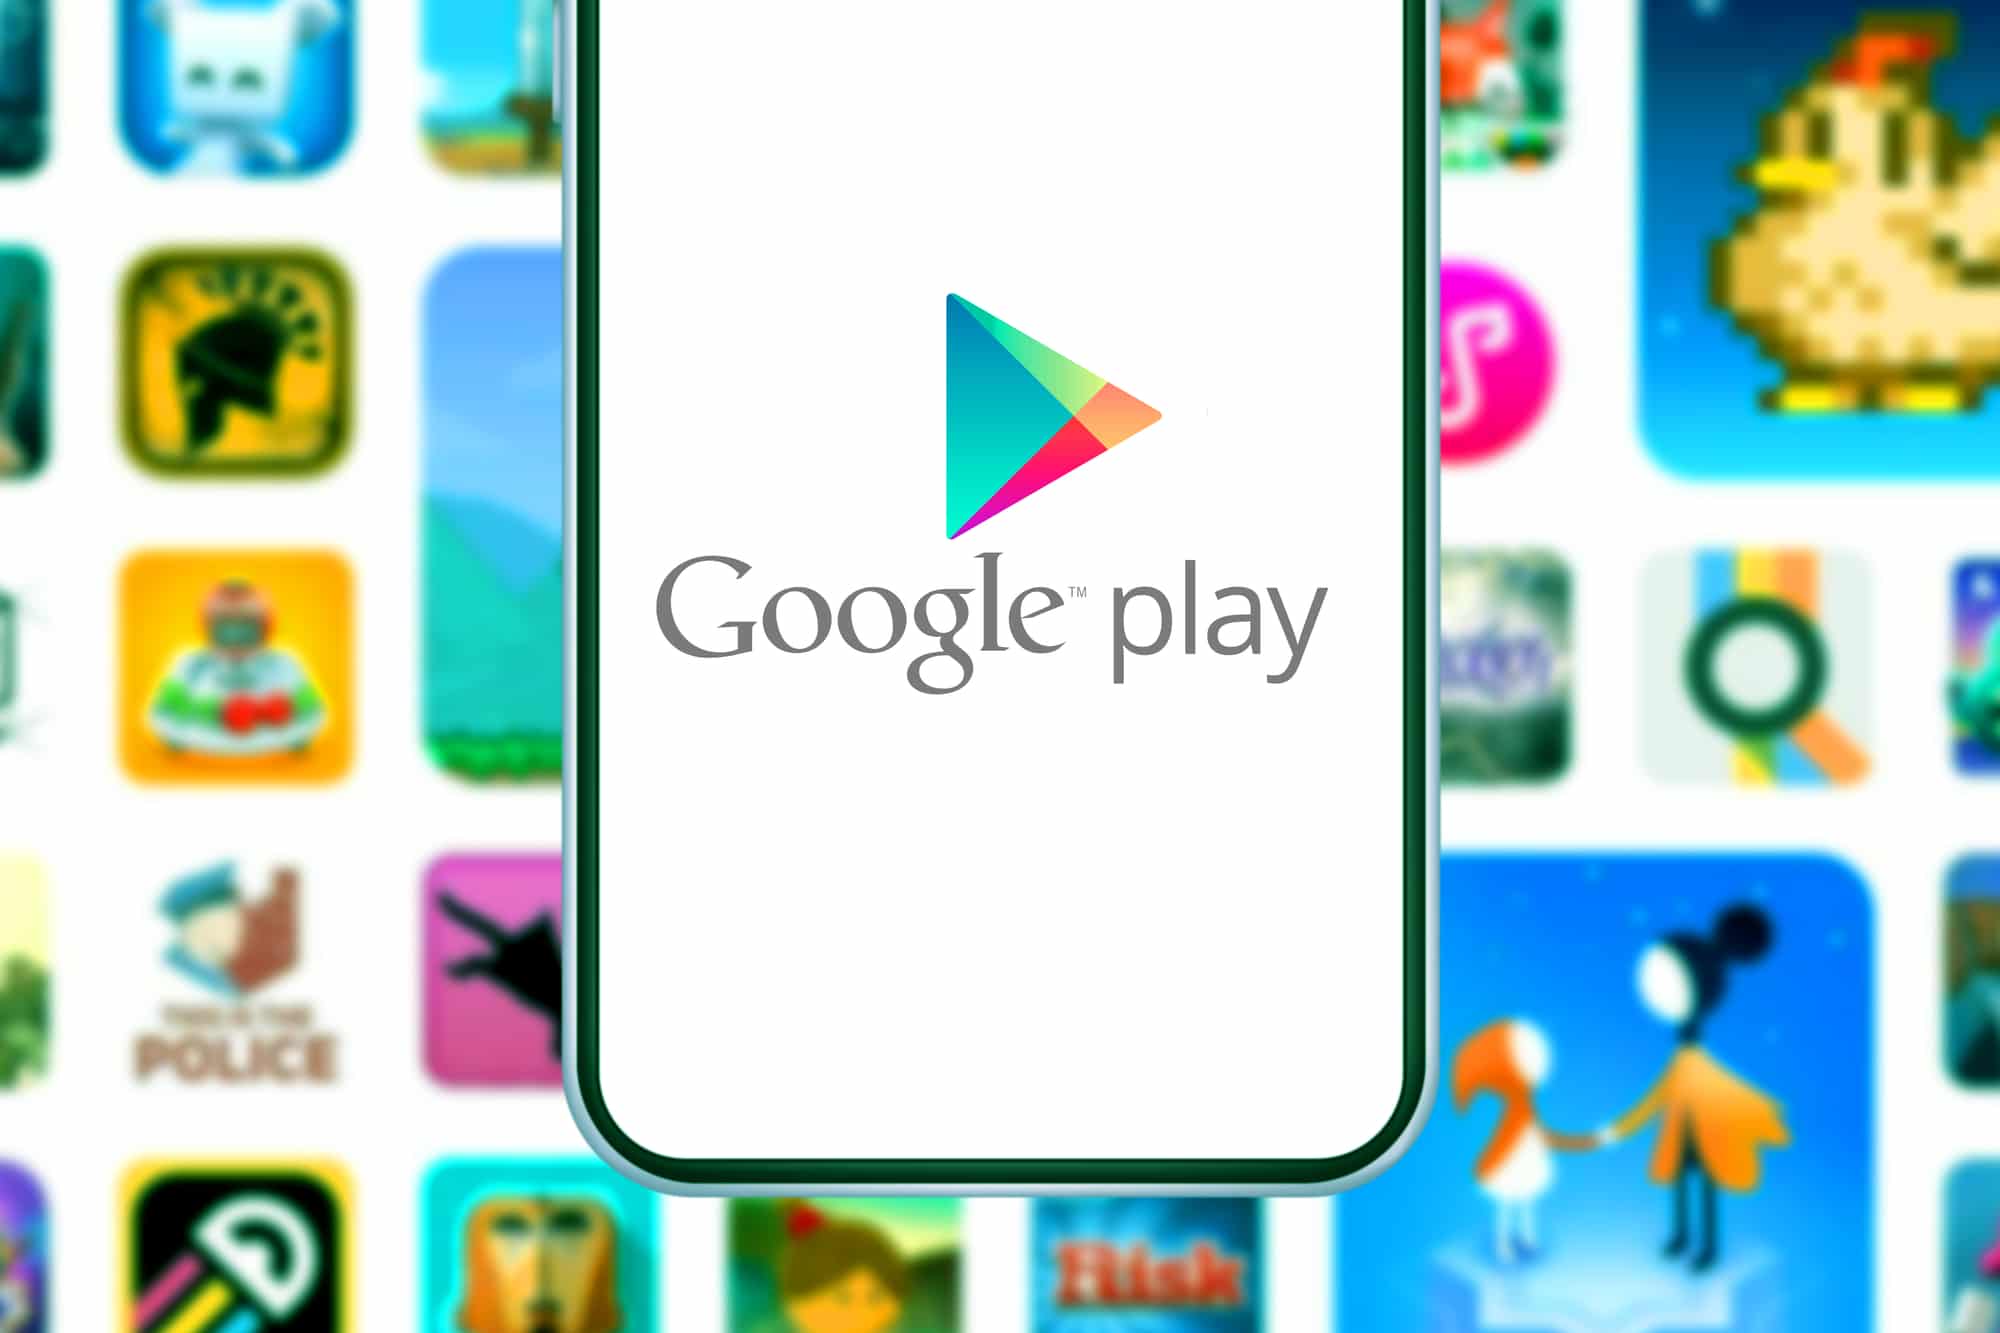 The Google Play Store will provide information on the use of data by the thumbnail apps